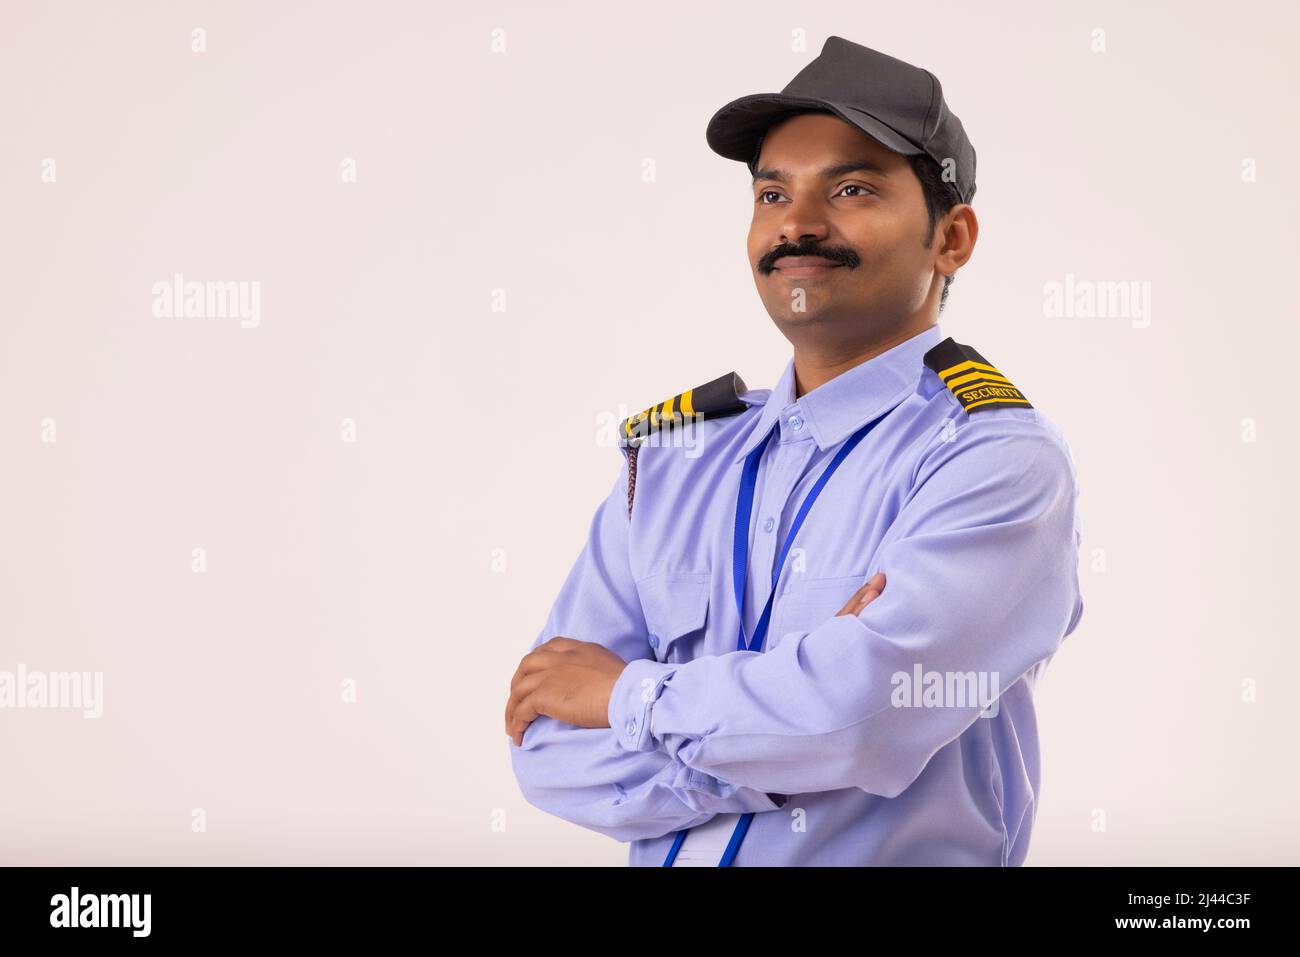 Portrait of Security guard looking elsewhere with arms folded Stock Photo